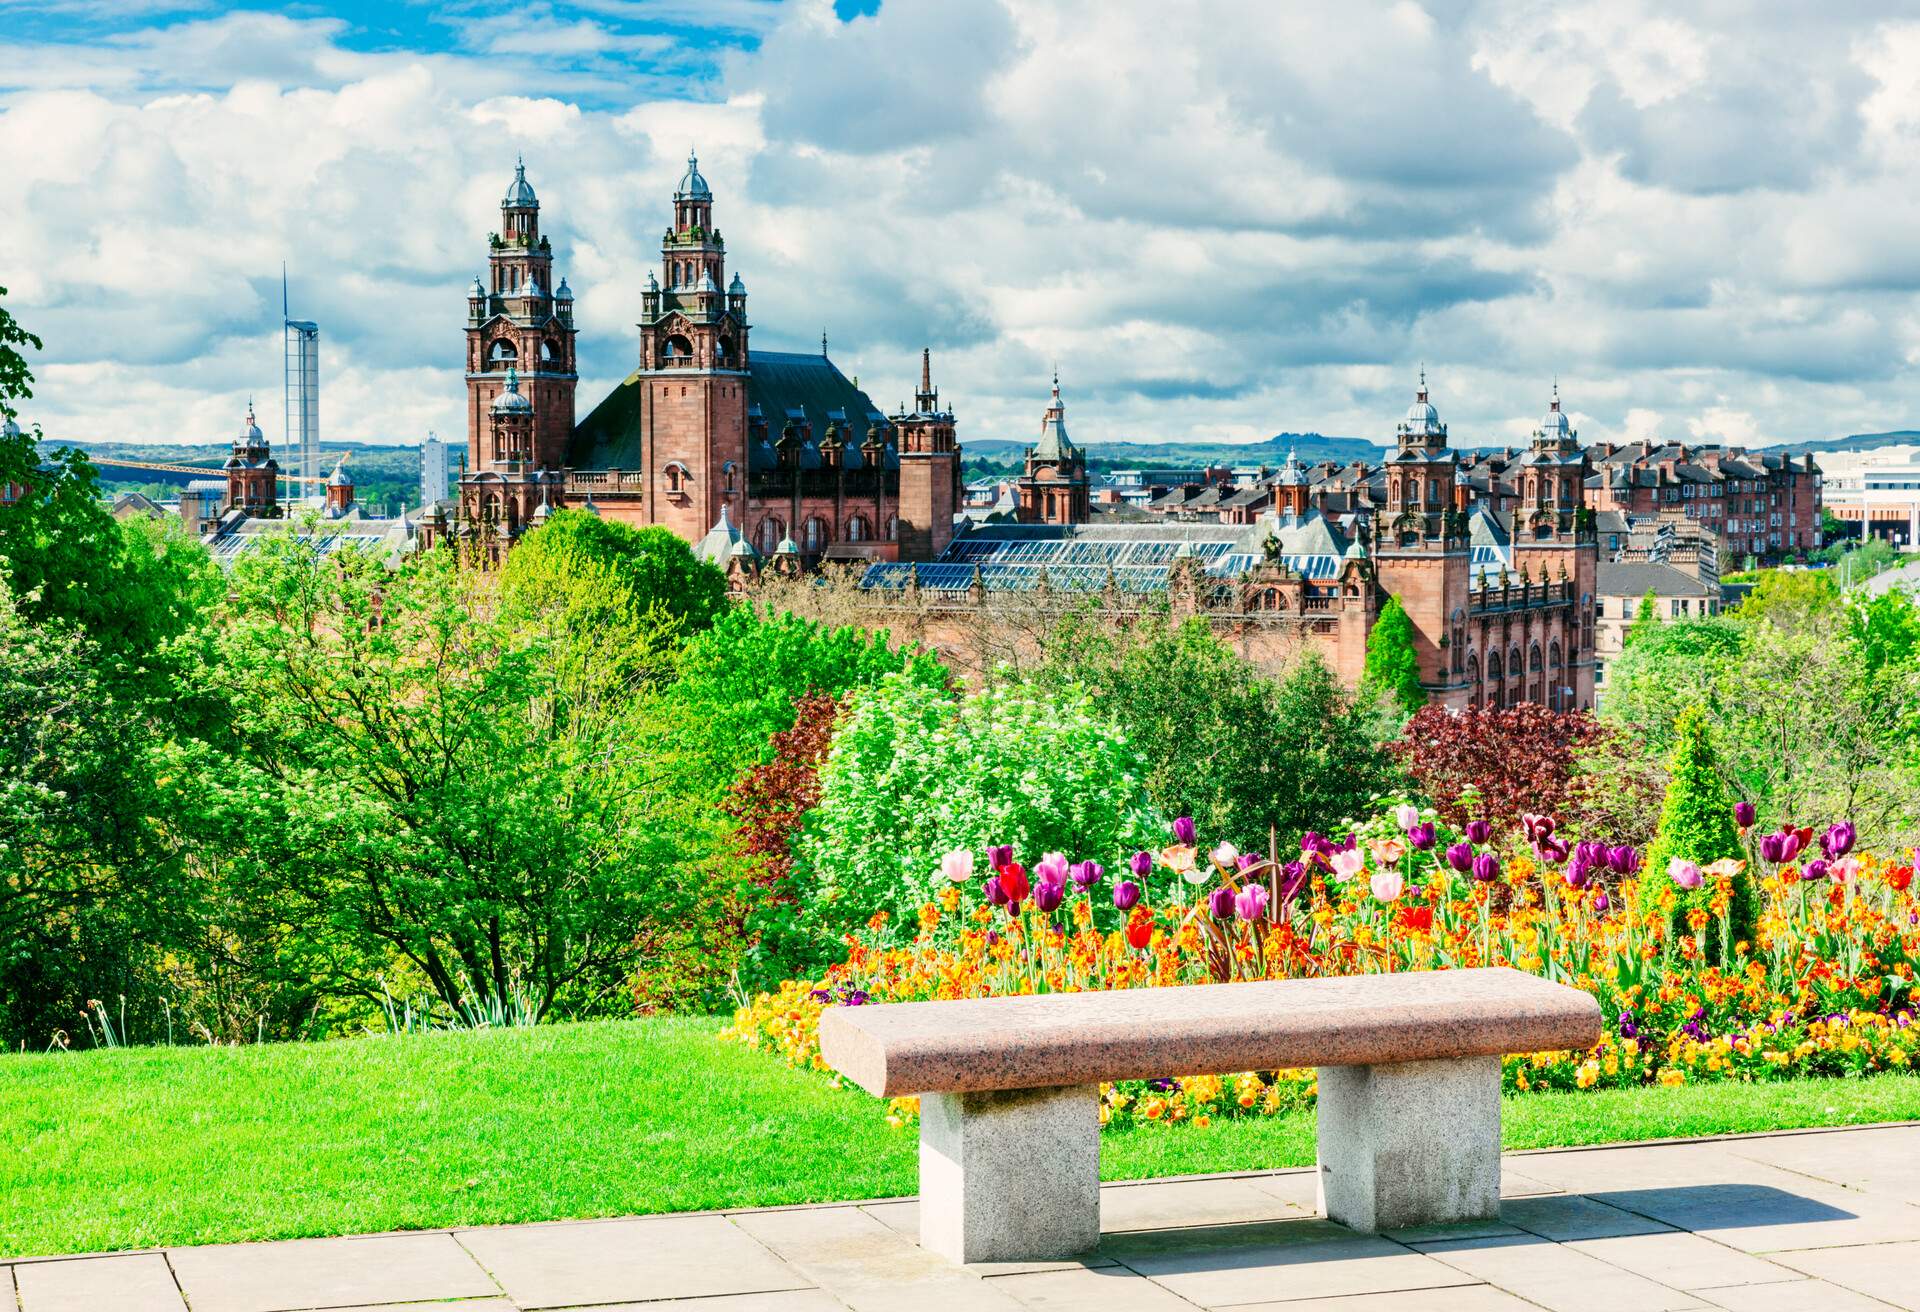 View over the City of Glasgow, Scotland, from the University grounds looking towards Kelvingrove. AdobeRGB colorspace.